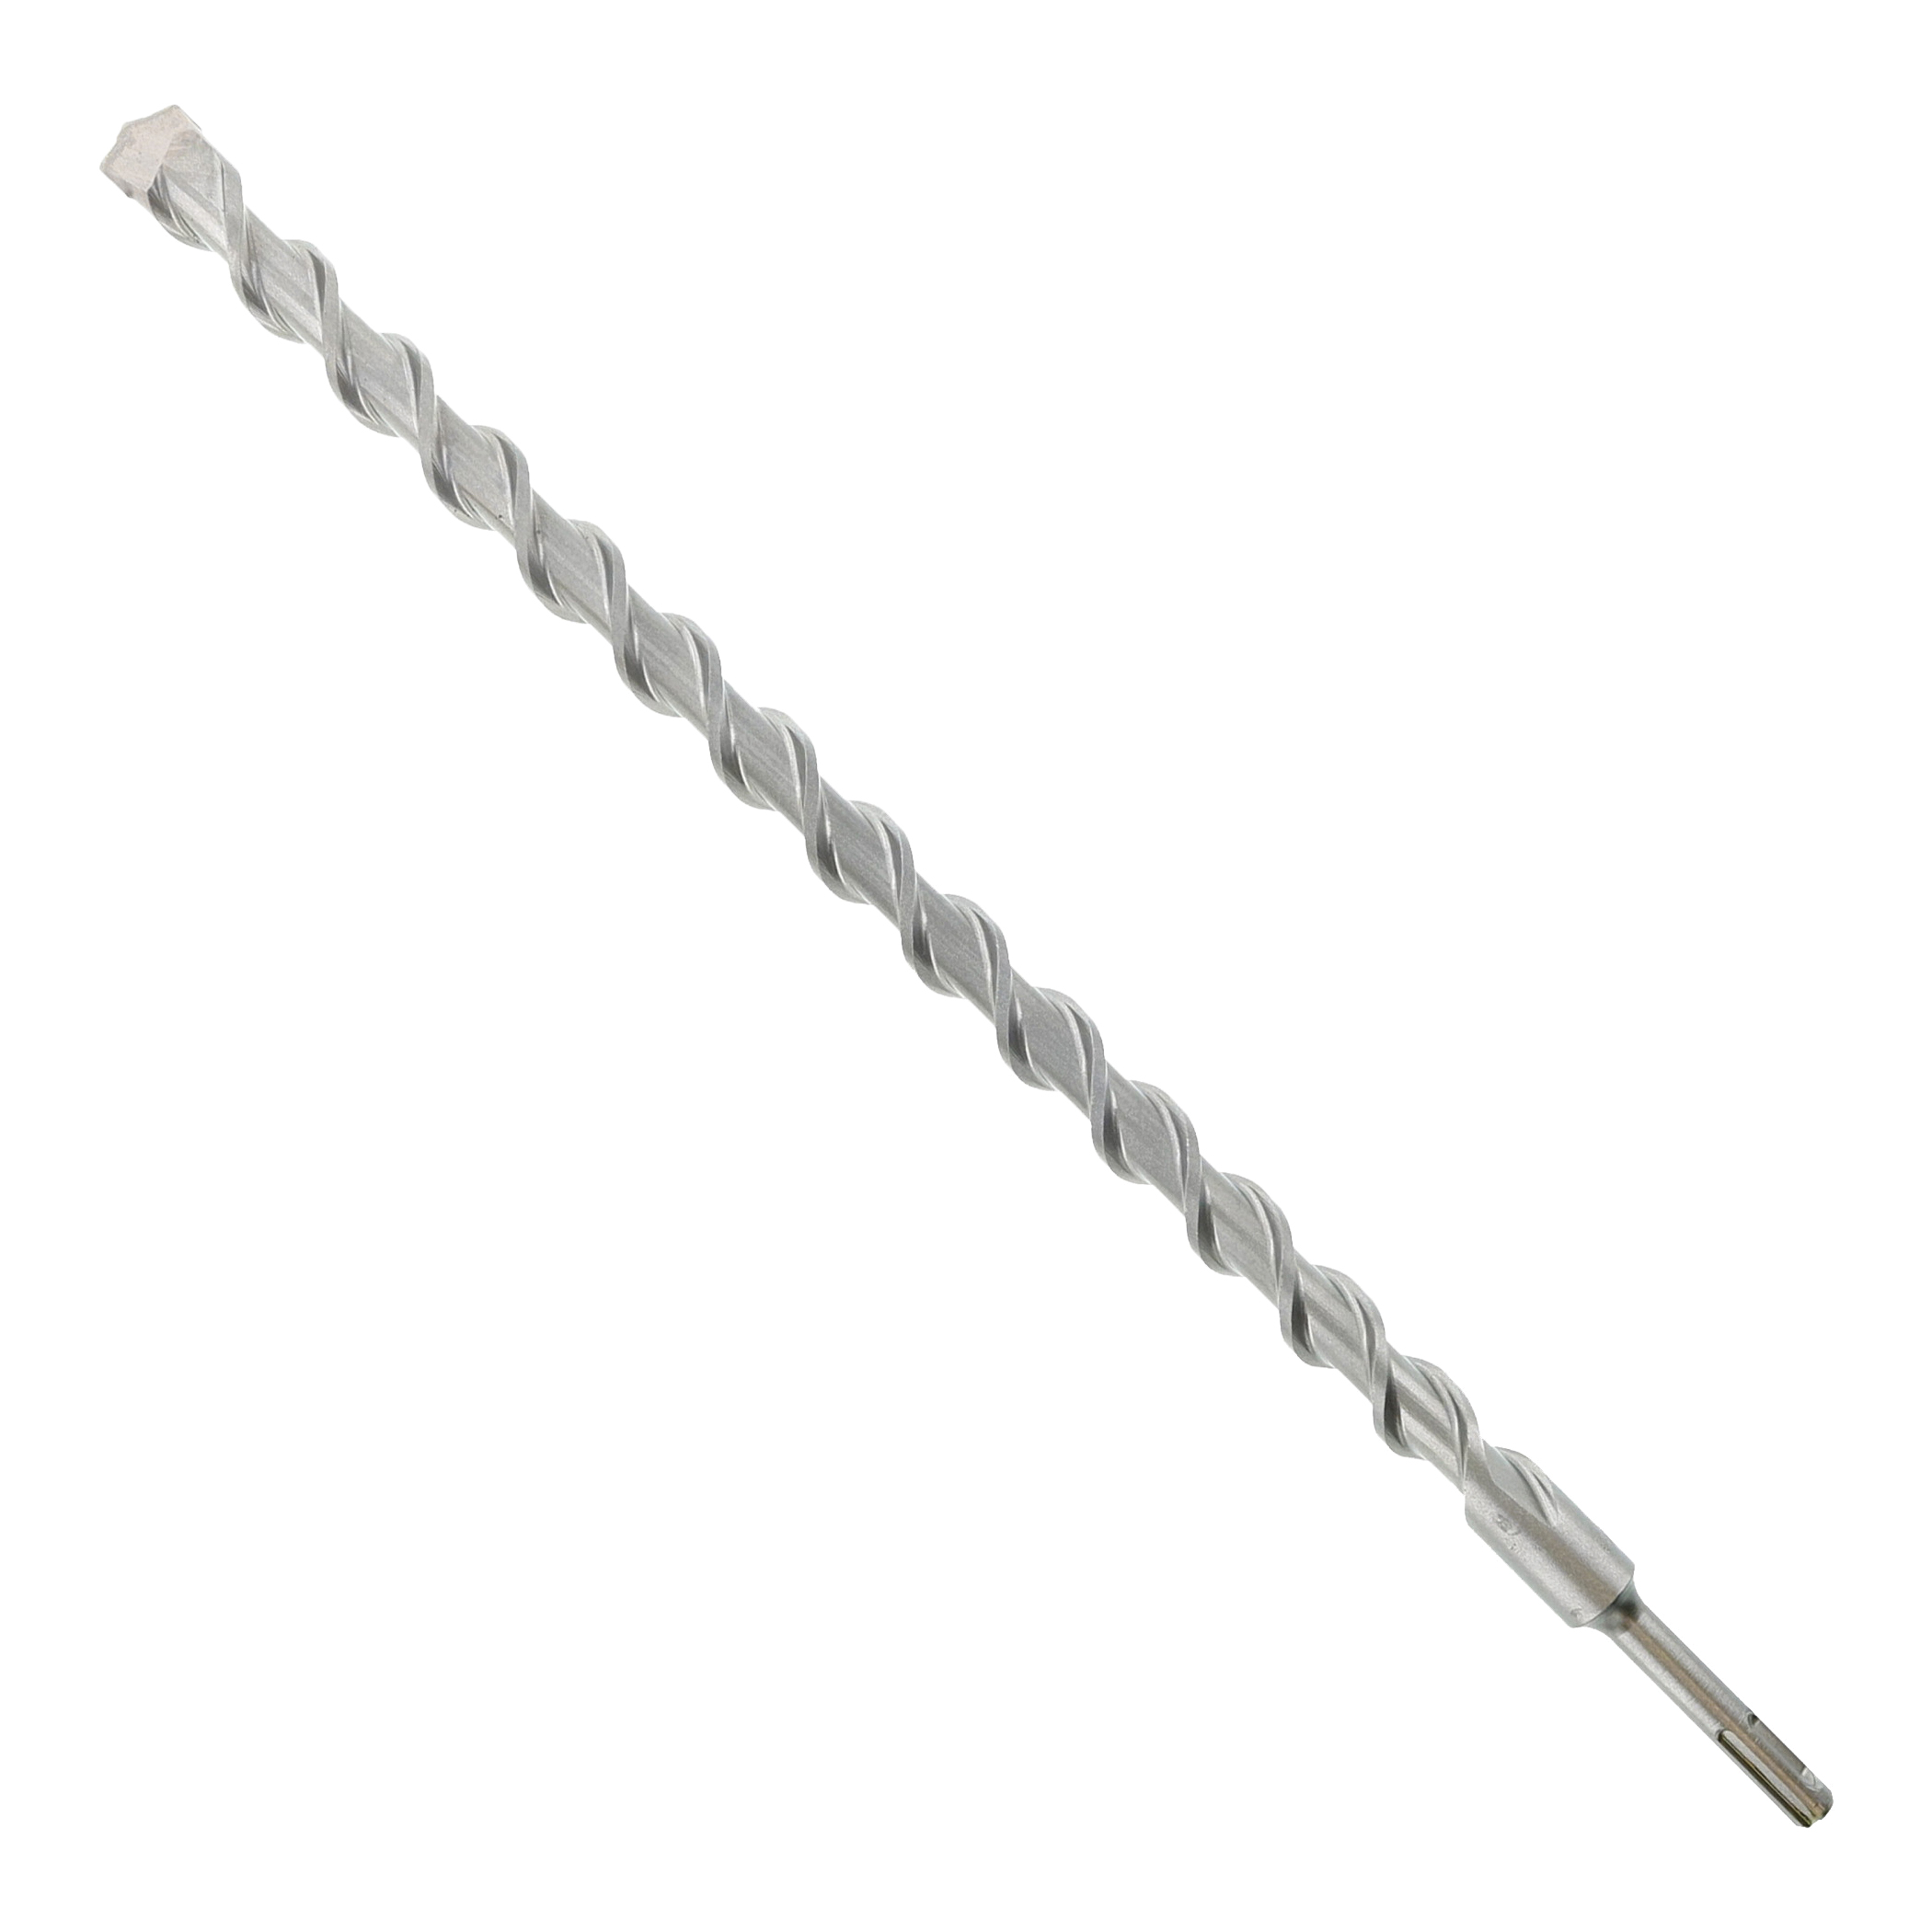 DMAPL2470 Hammer Drill Bit, 3/4 in Dia, 18 in OAL, Percussion, 4-Flute, SDS Plus Shank